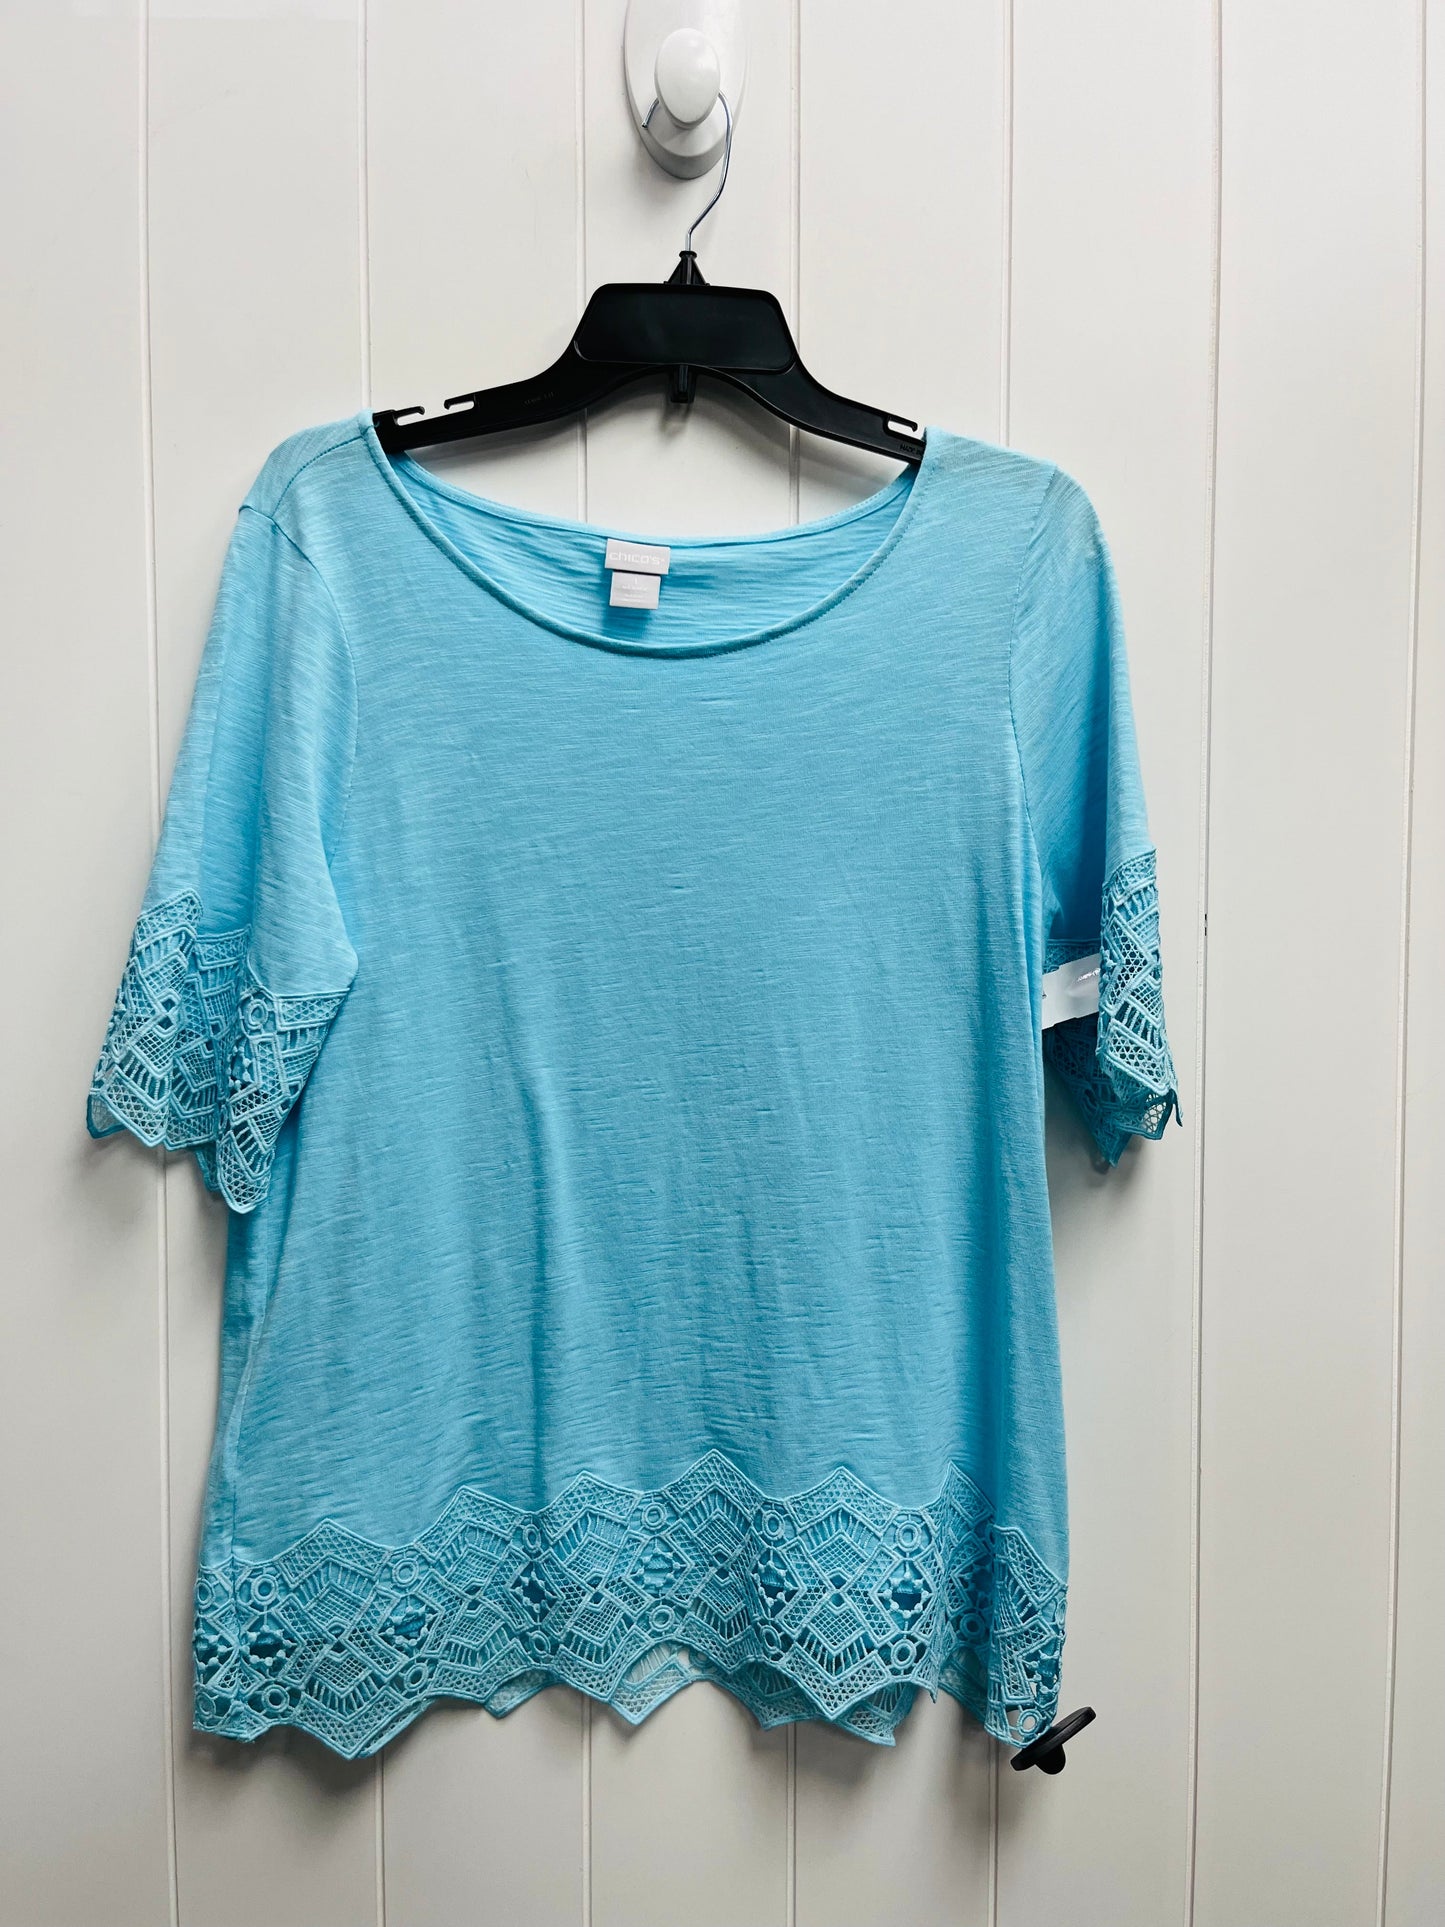 Blue Top Short Sleeve Chicos, Size M